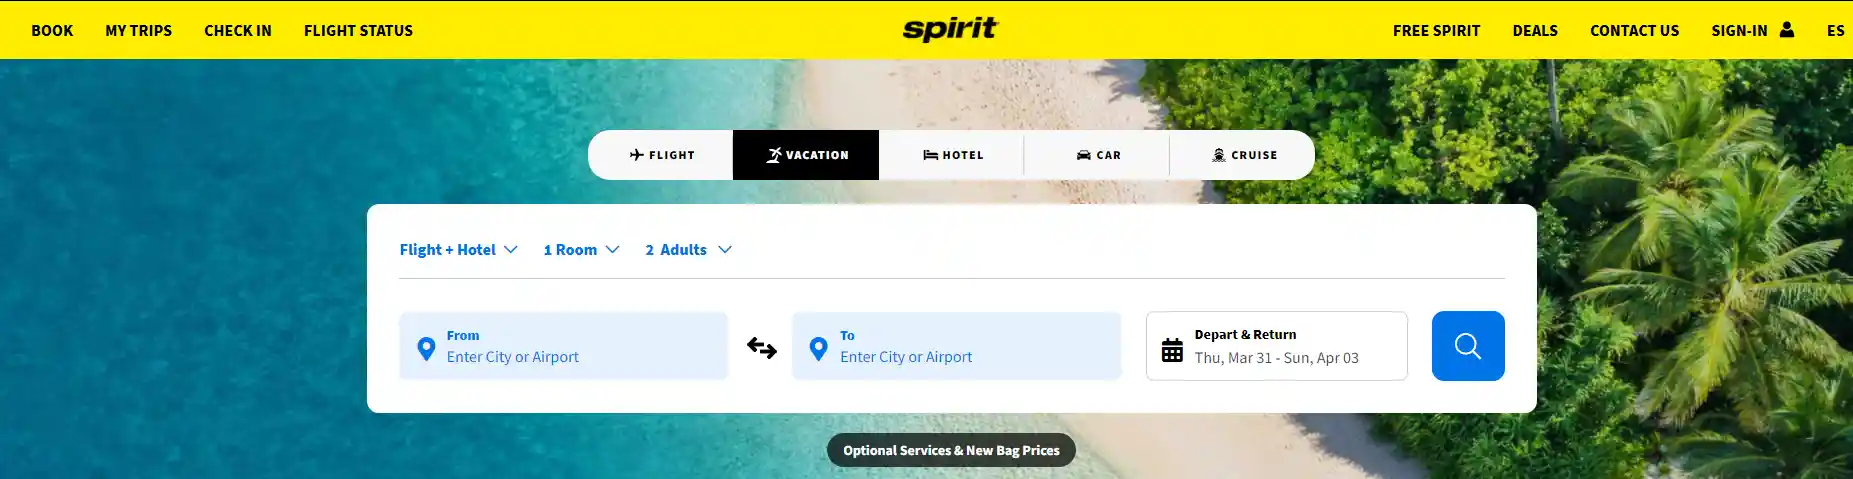 Find Spirit Airlines Vacation Package